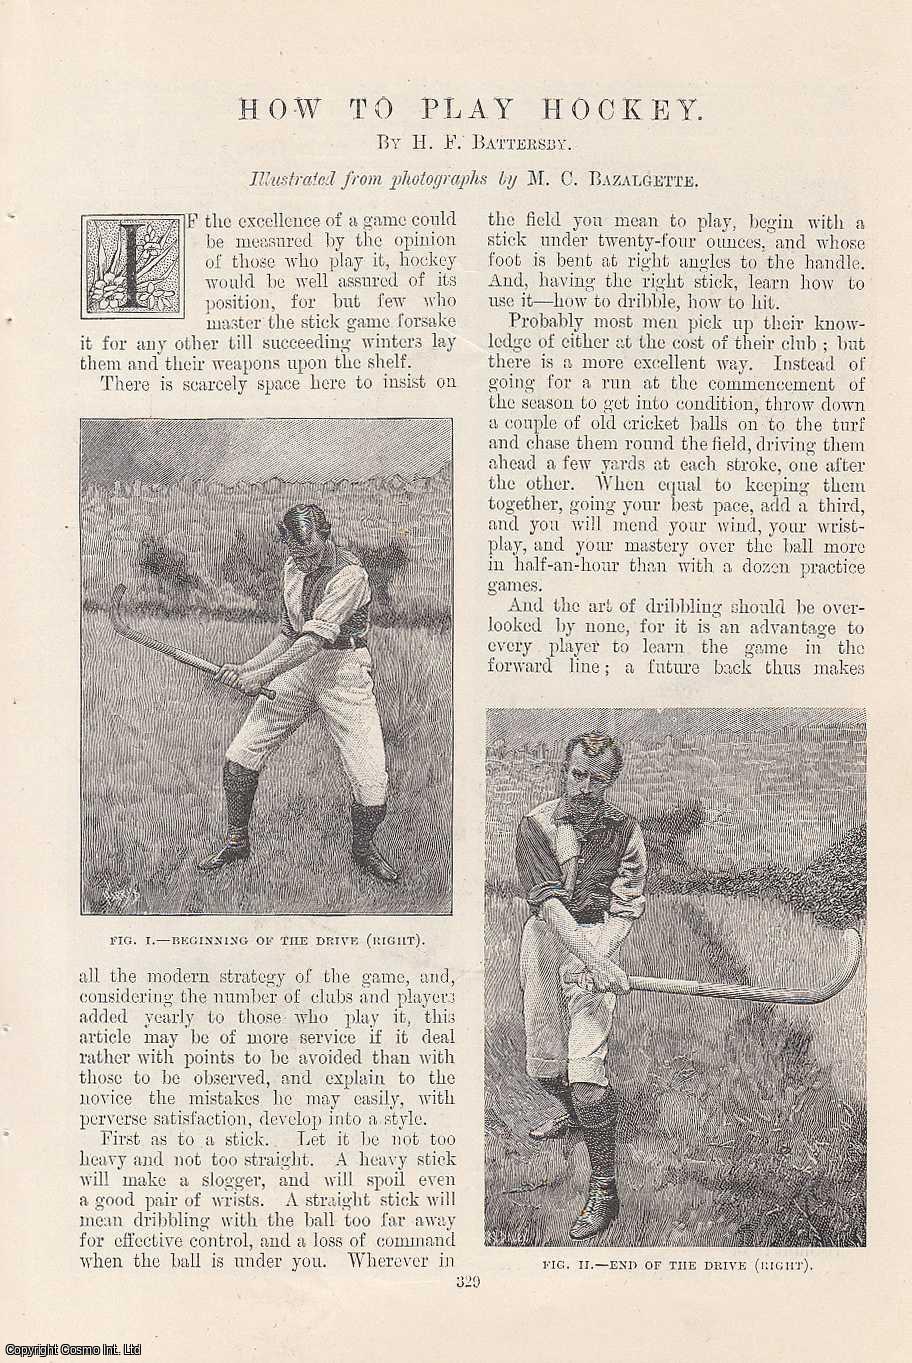 H.F. Battersby - How to Play Hockey. Illustrated by M. C. Bazalgette. An original article from the Windsor Magazine, 1895.